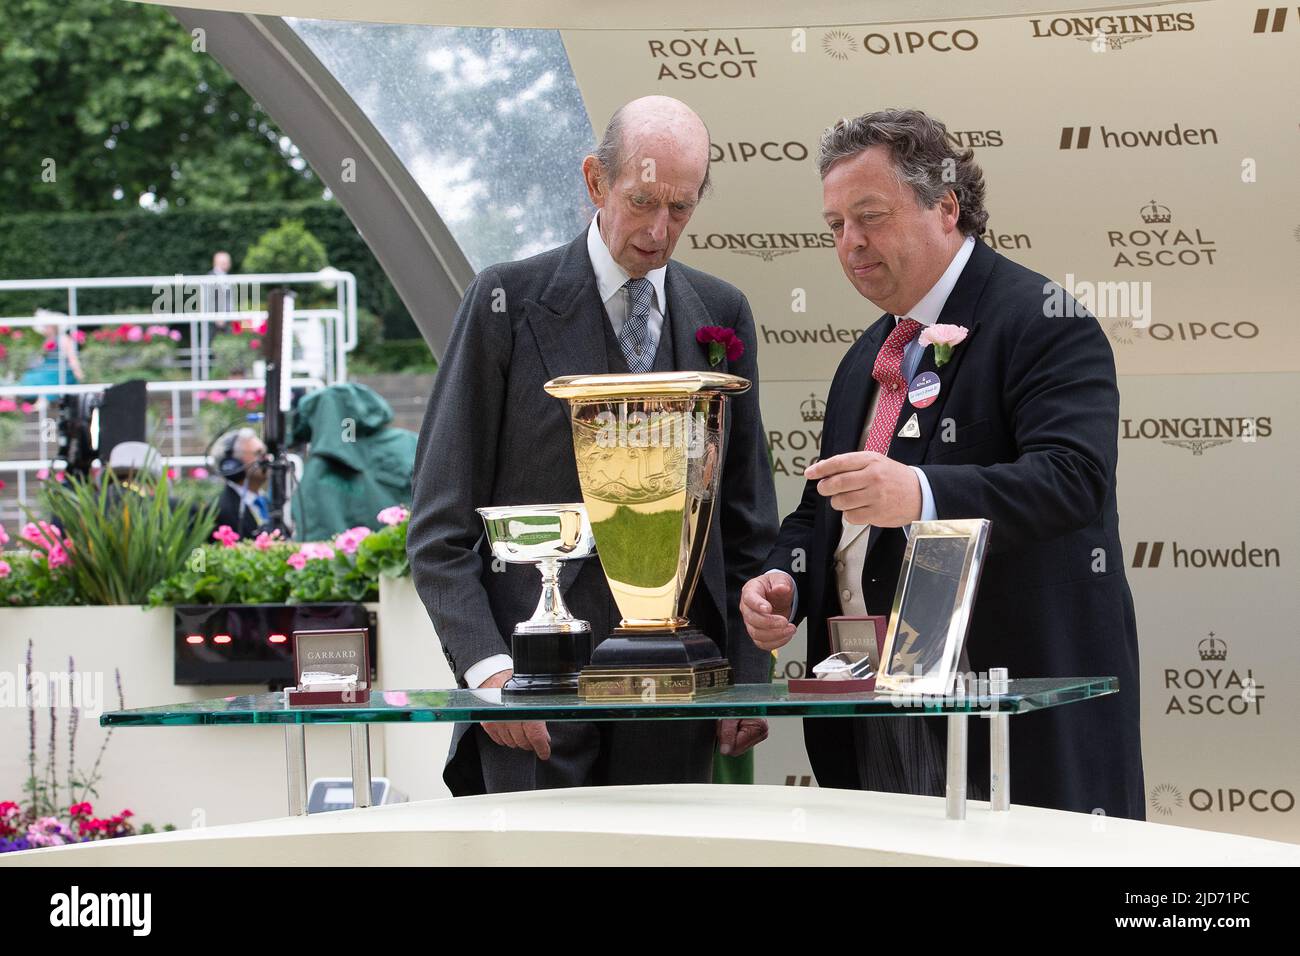 Ascot, Berkshire, UK. 18th June, 2022. HRH The Duke of Kent made the presentation to the winning owners, trainer and jockey. Horse Naval Crown ridden by jockey James Doyle won the Platinum Jubilee Stakes million pound race. This was another win for Godolphin and trainer Charlie Appleby. Credit: Maureen McLean/Alamy Live News Stock Photo